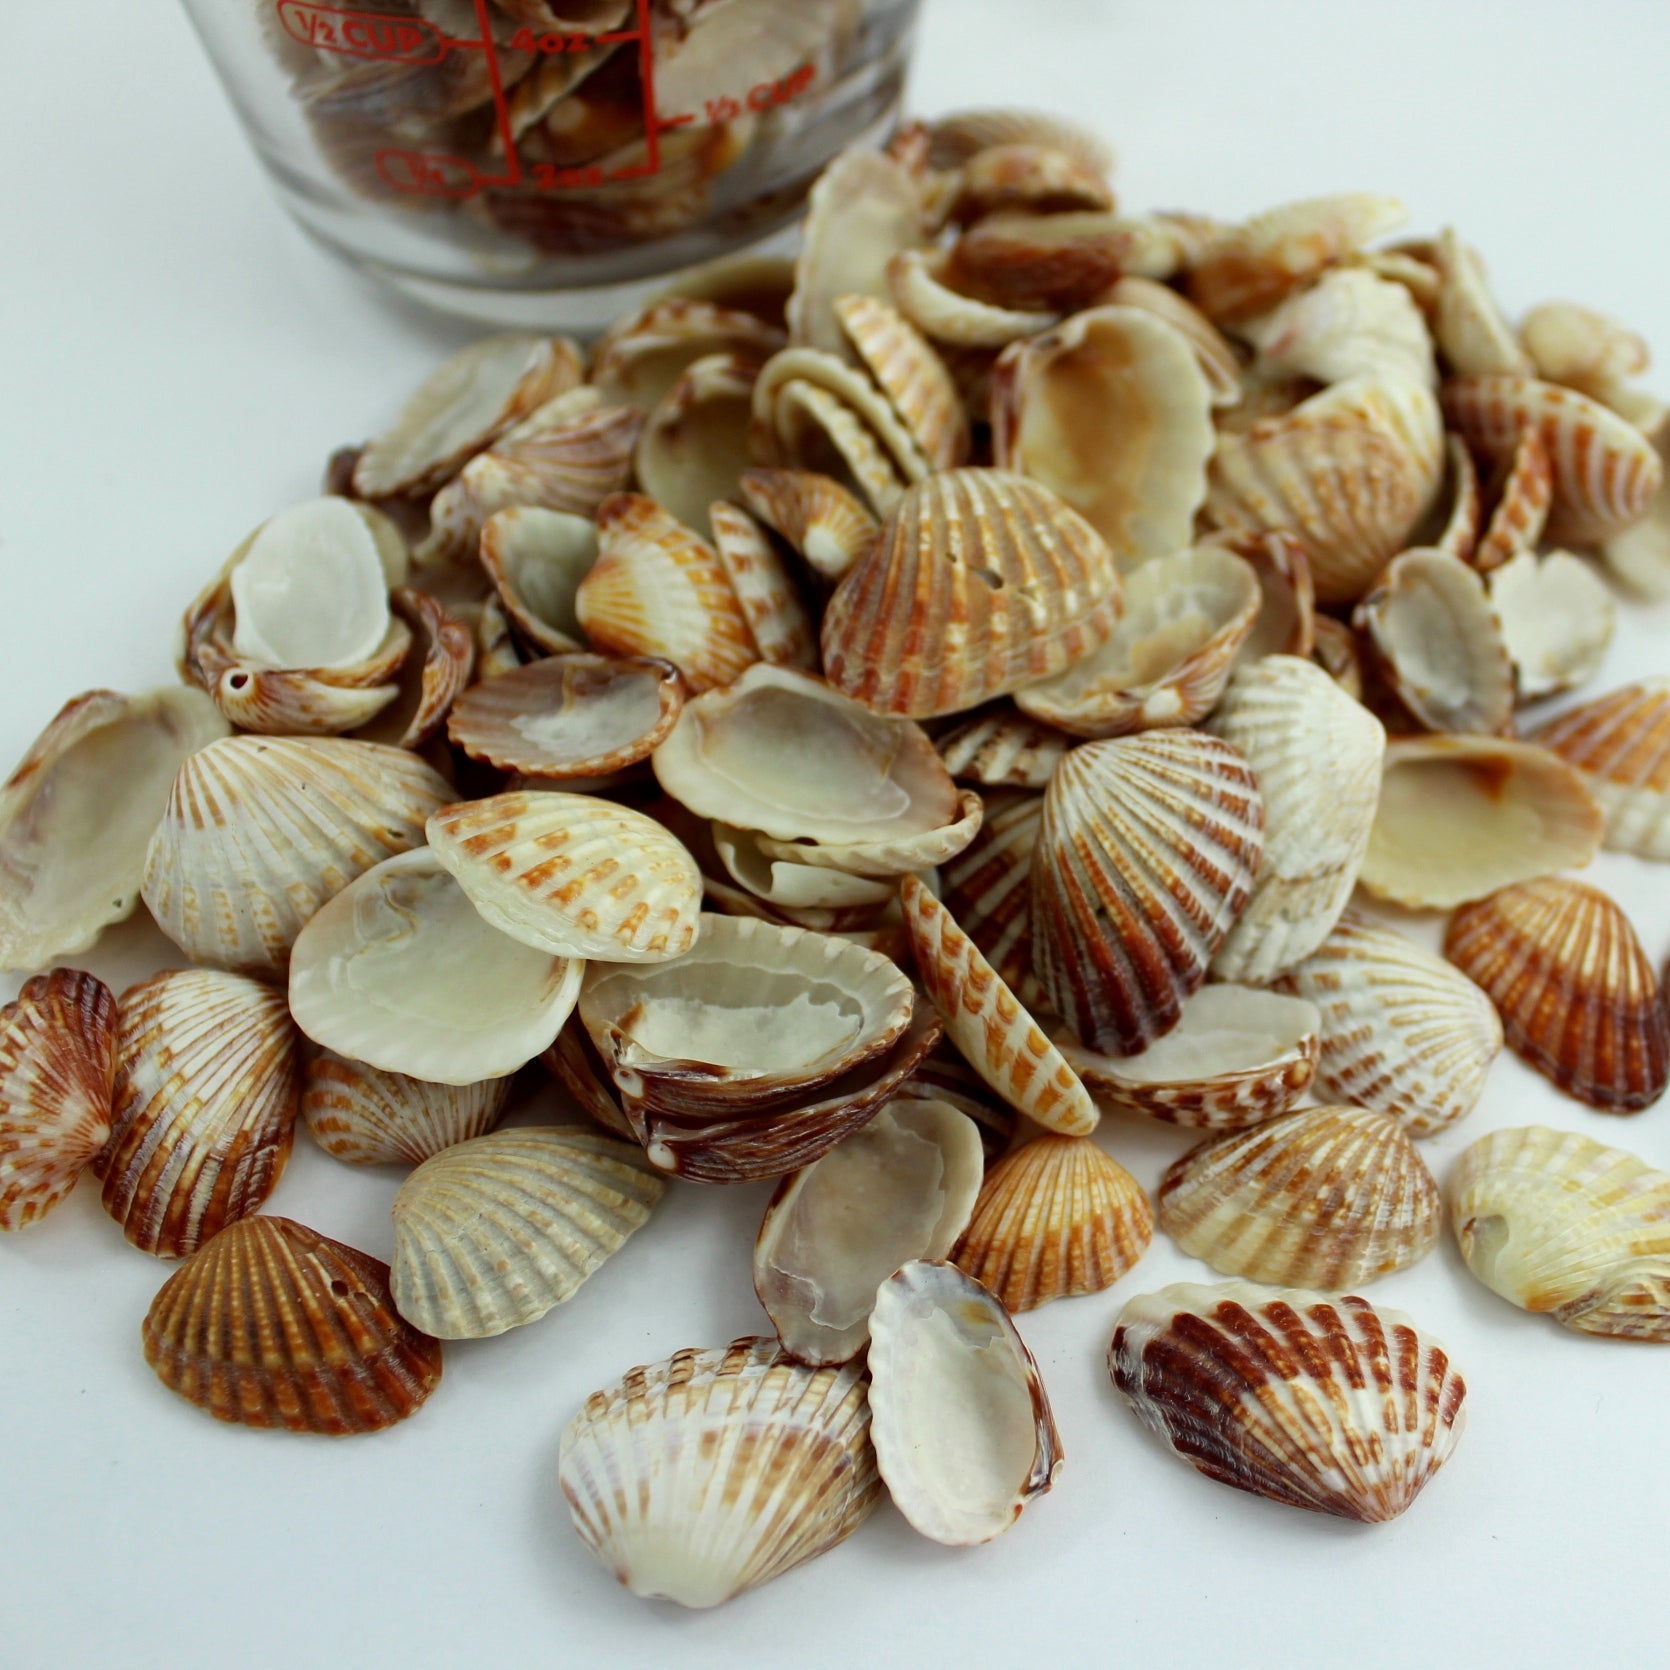 Natural Red Cardita Loose Seashells - Jewelry Craft Shell Art Decor Display over 2 cups of small shells for jewelry mirror frames